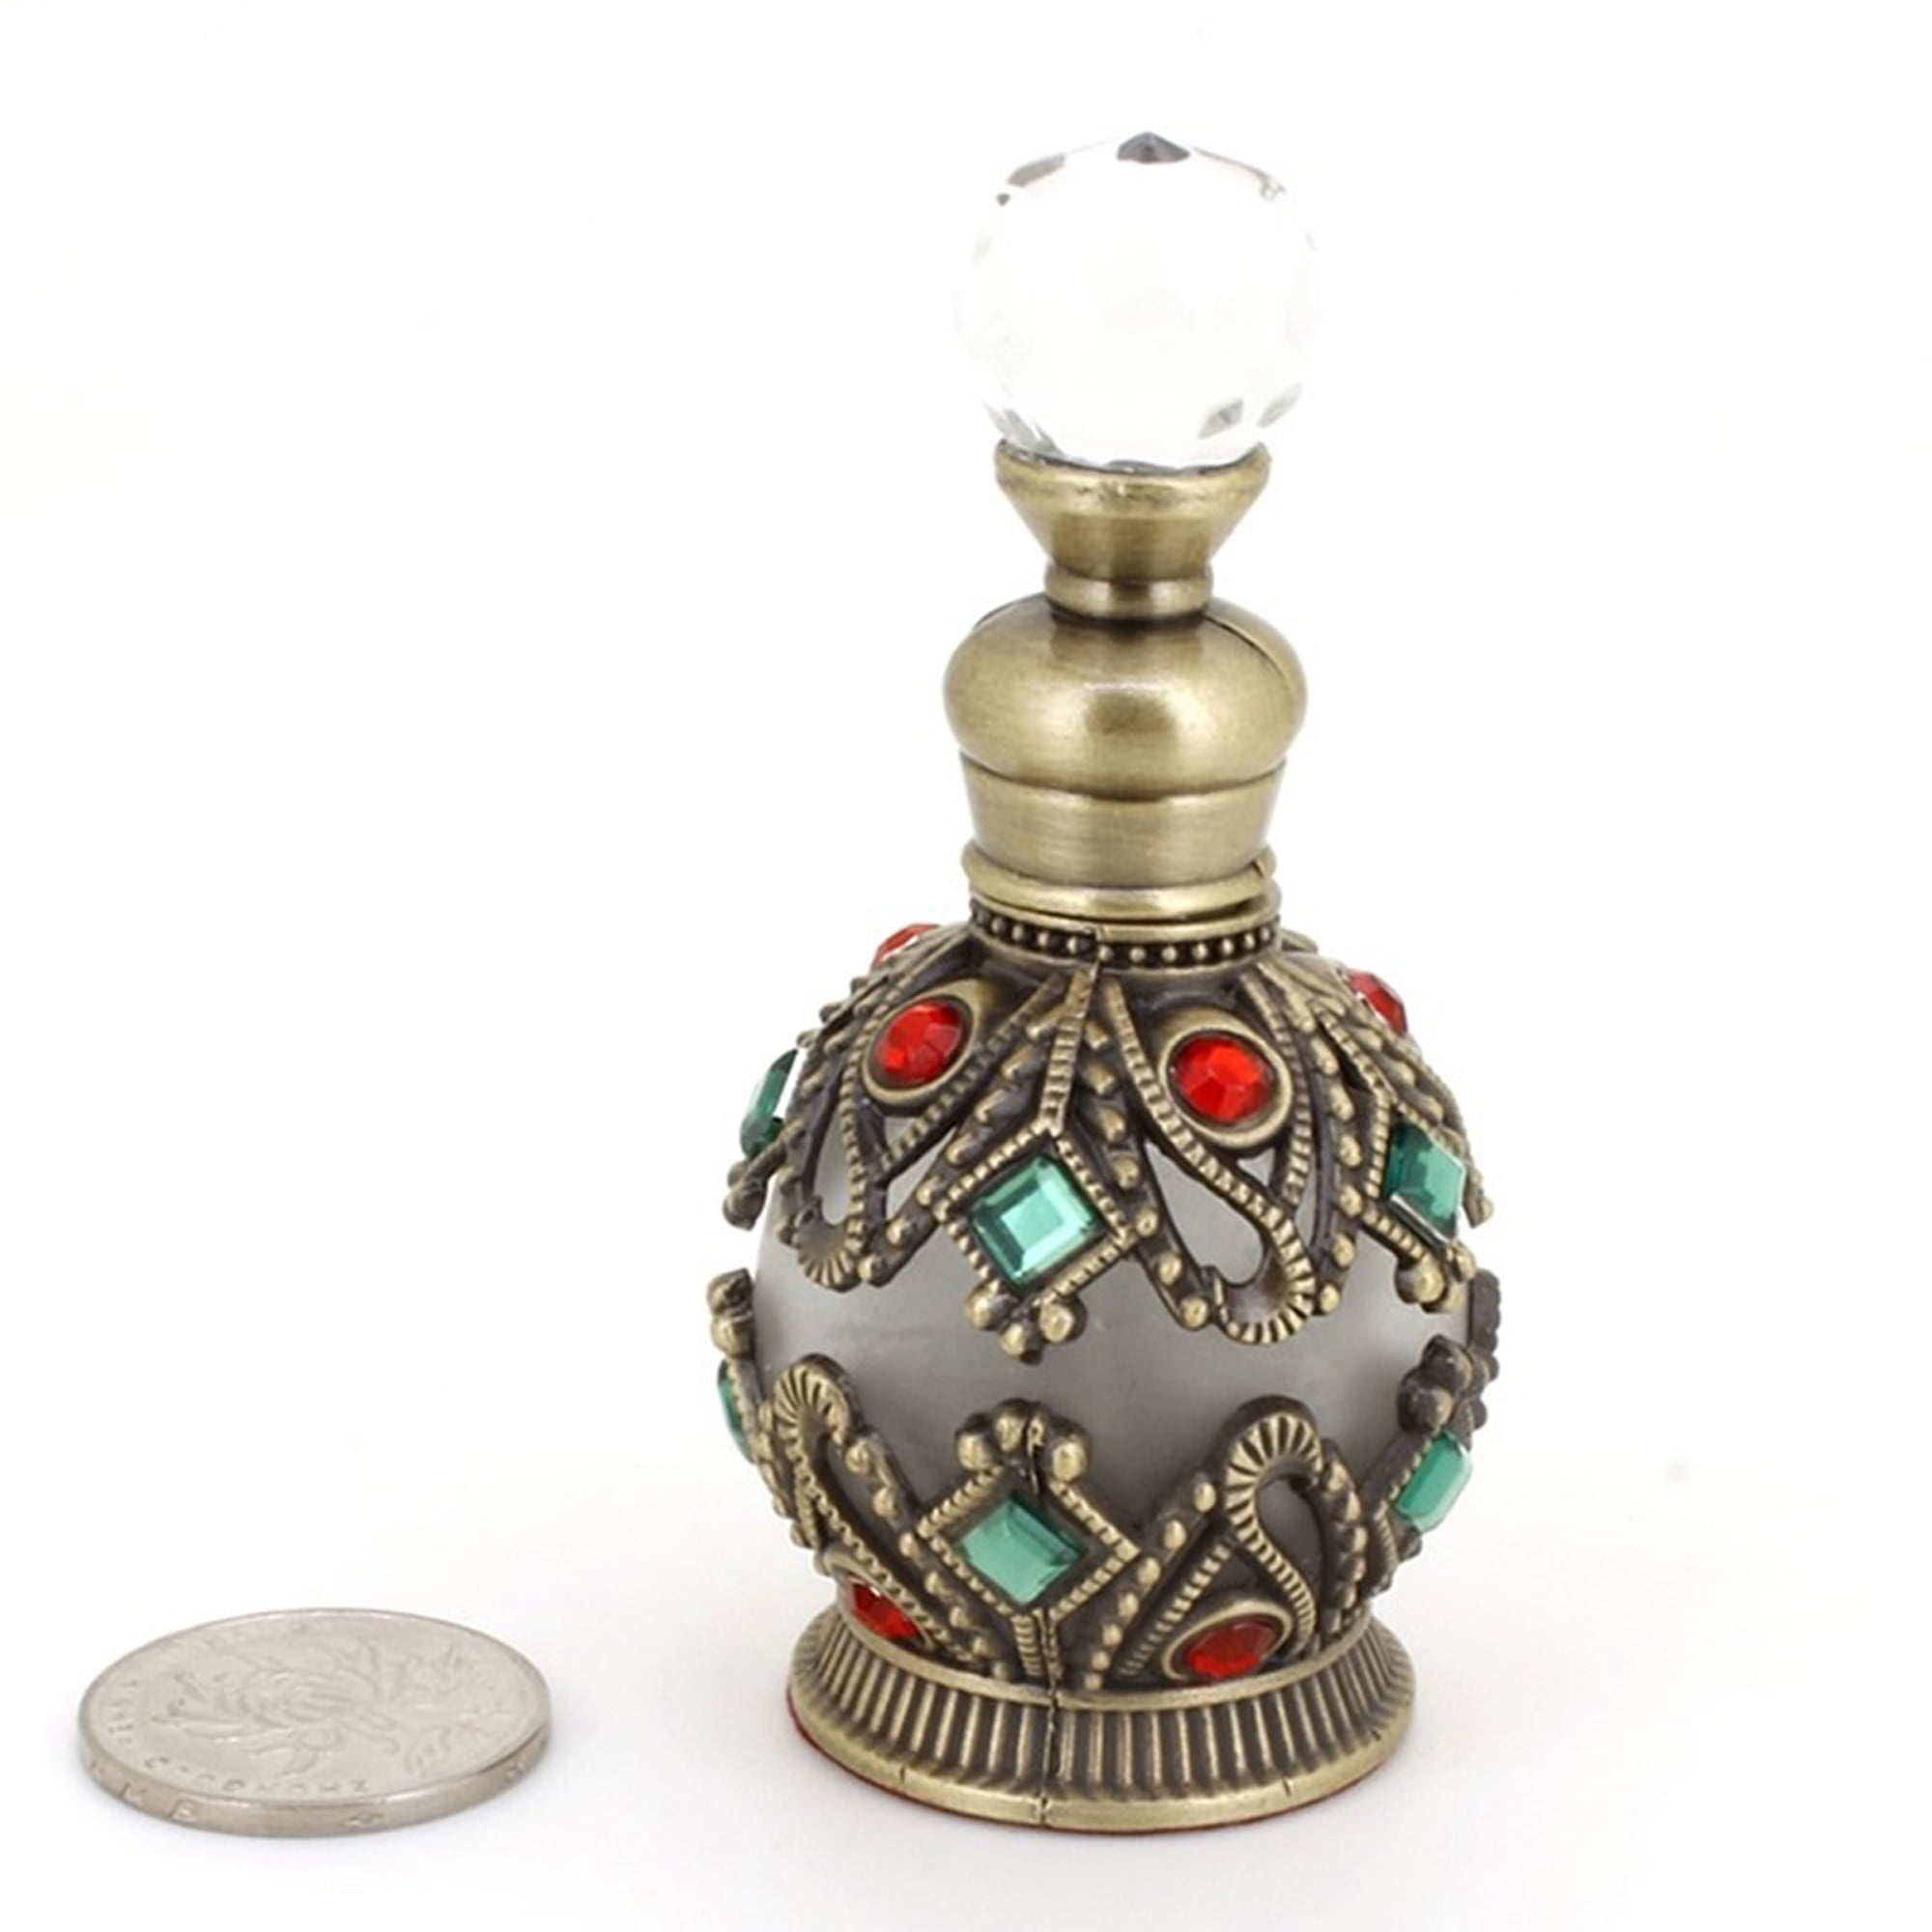 Perfume Bottle, Vintage Perfume Bottles with Heart Design with Decorative  Jewelry for Perfume 